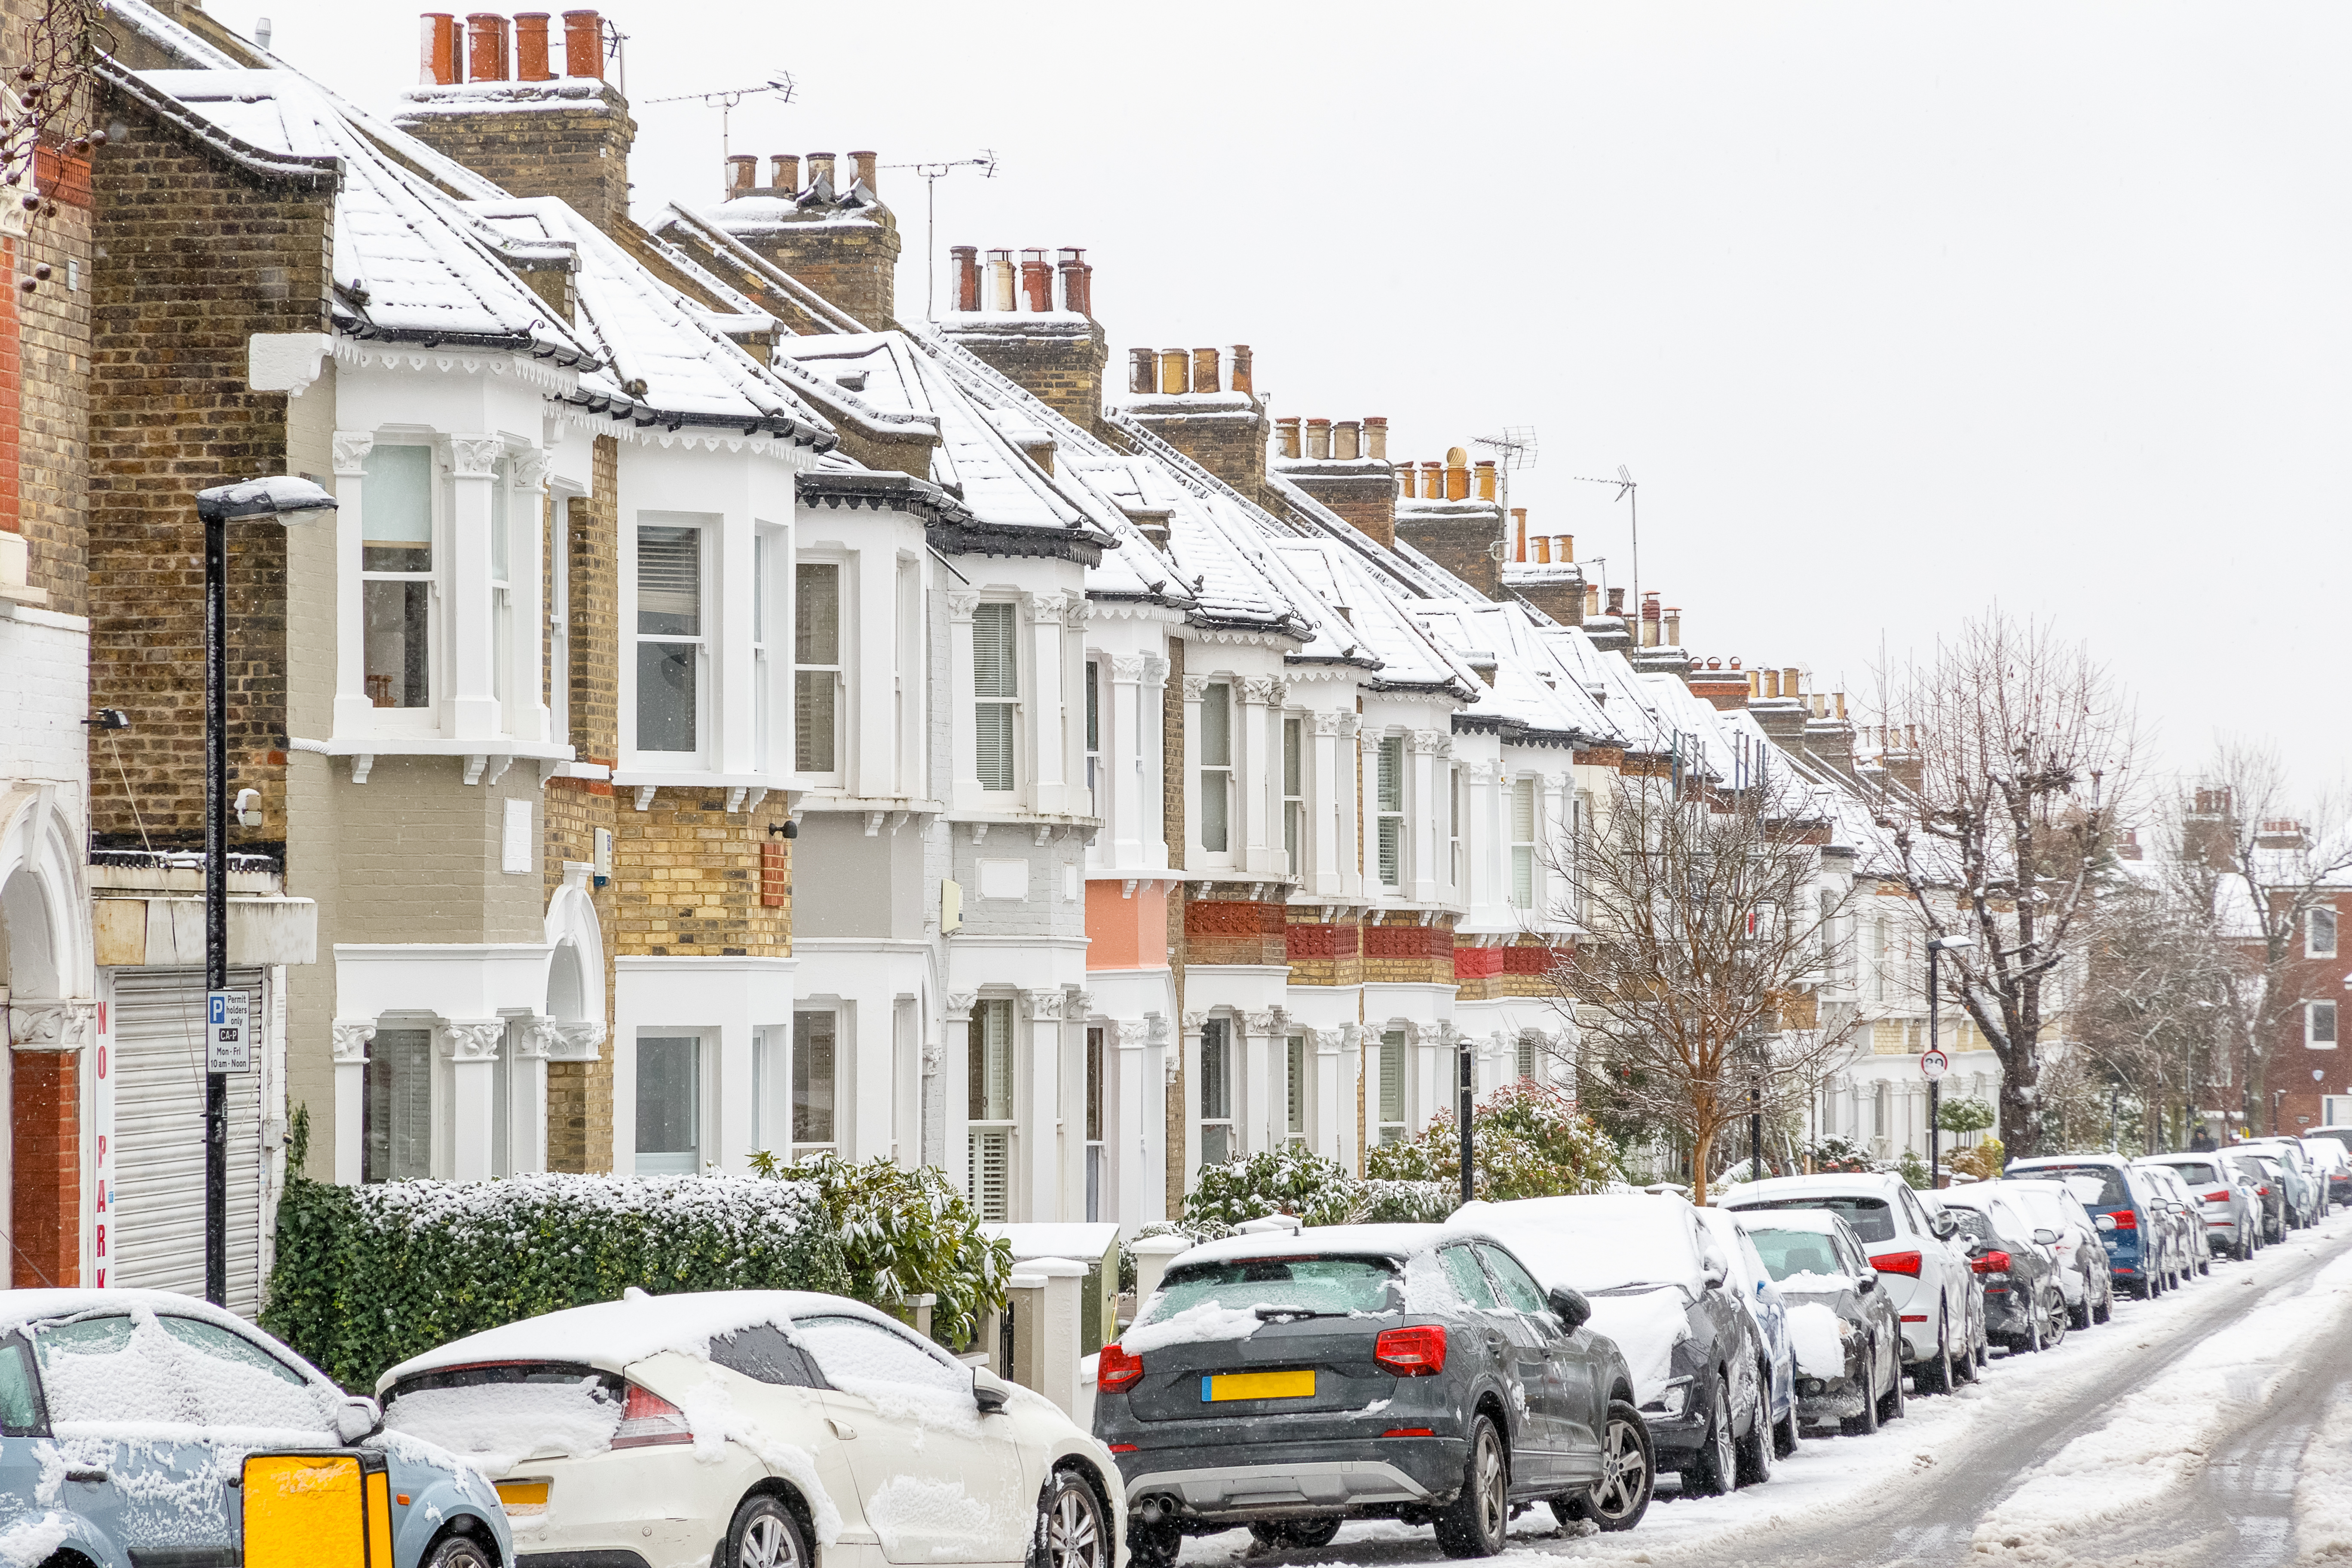 UK terrace houses with snow in winter